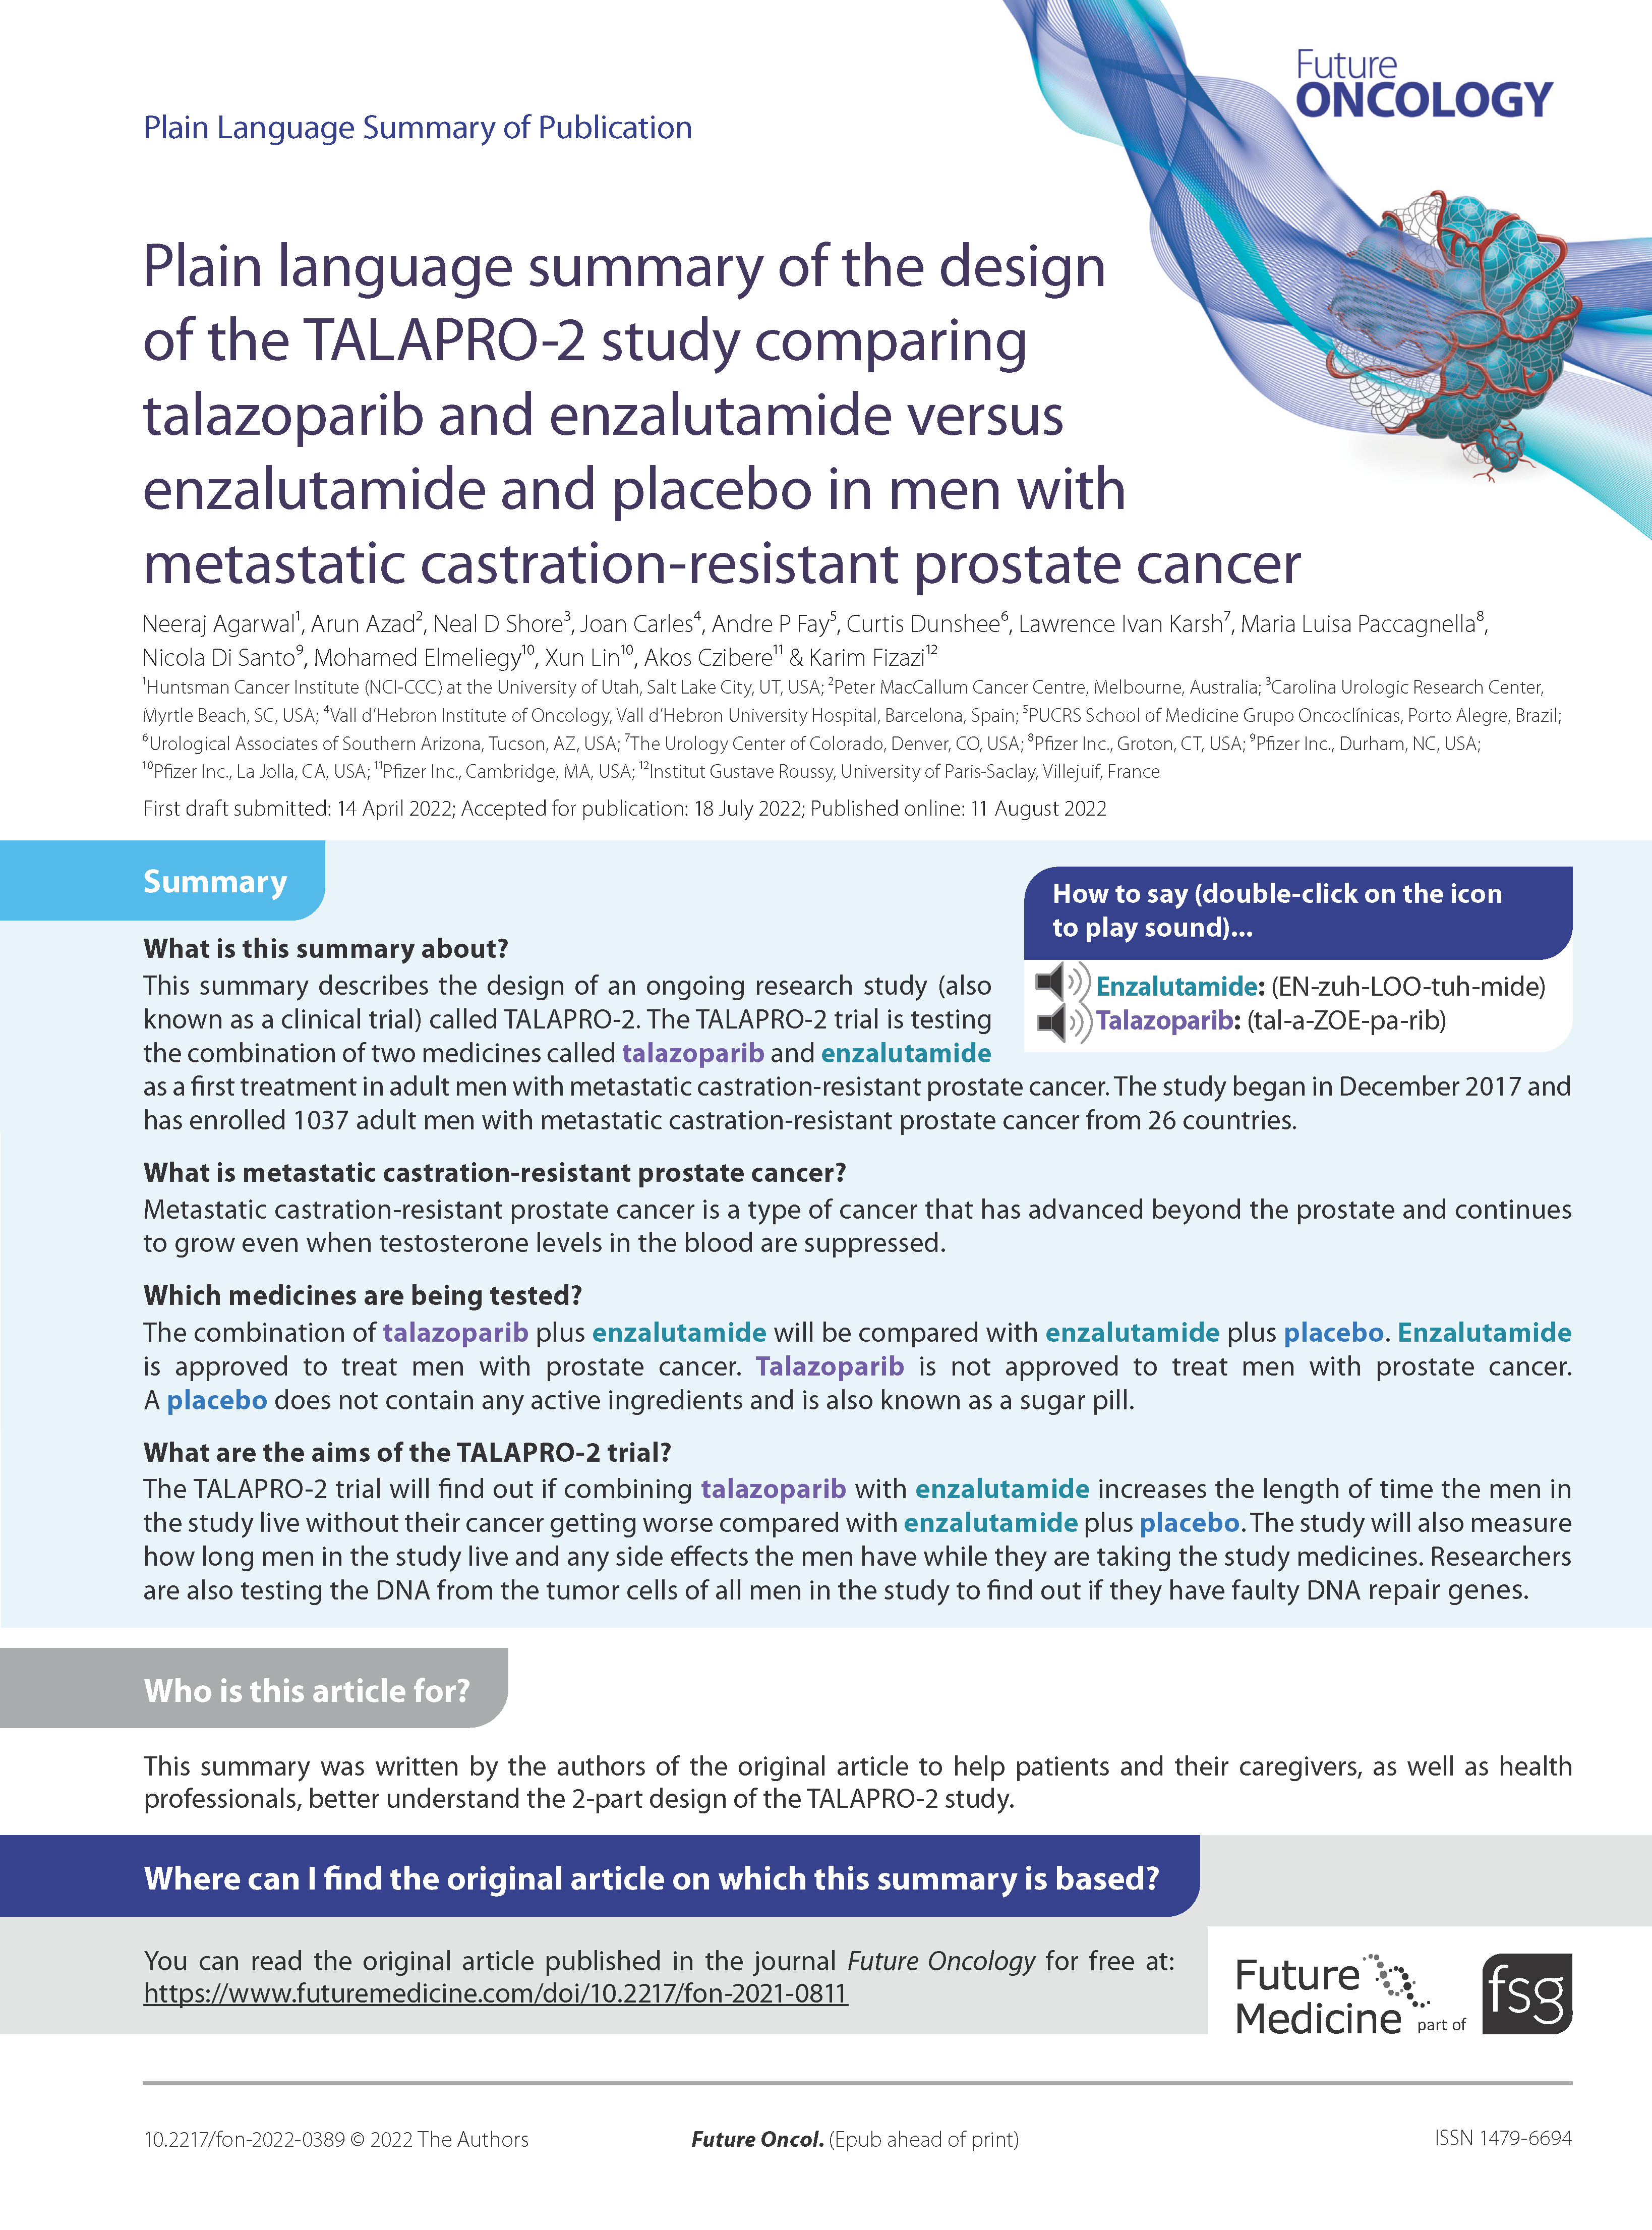 Plain language summary of the design of the TALAPRO-2 study comparing talazoparib and enzalutamide versus enzalutamide and placebo in men with metastatic castration-resistant prostate cancer